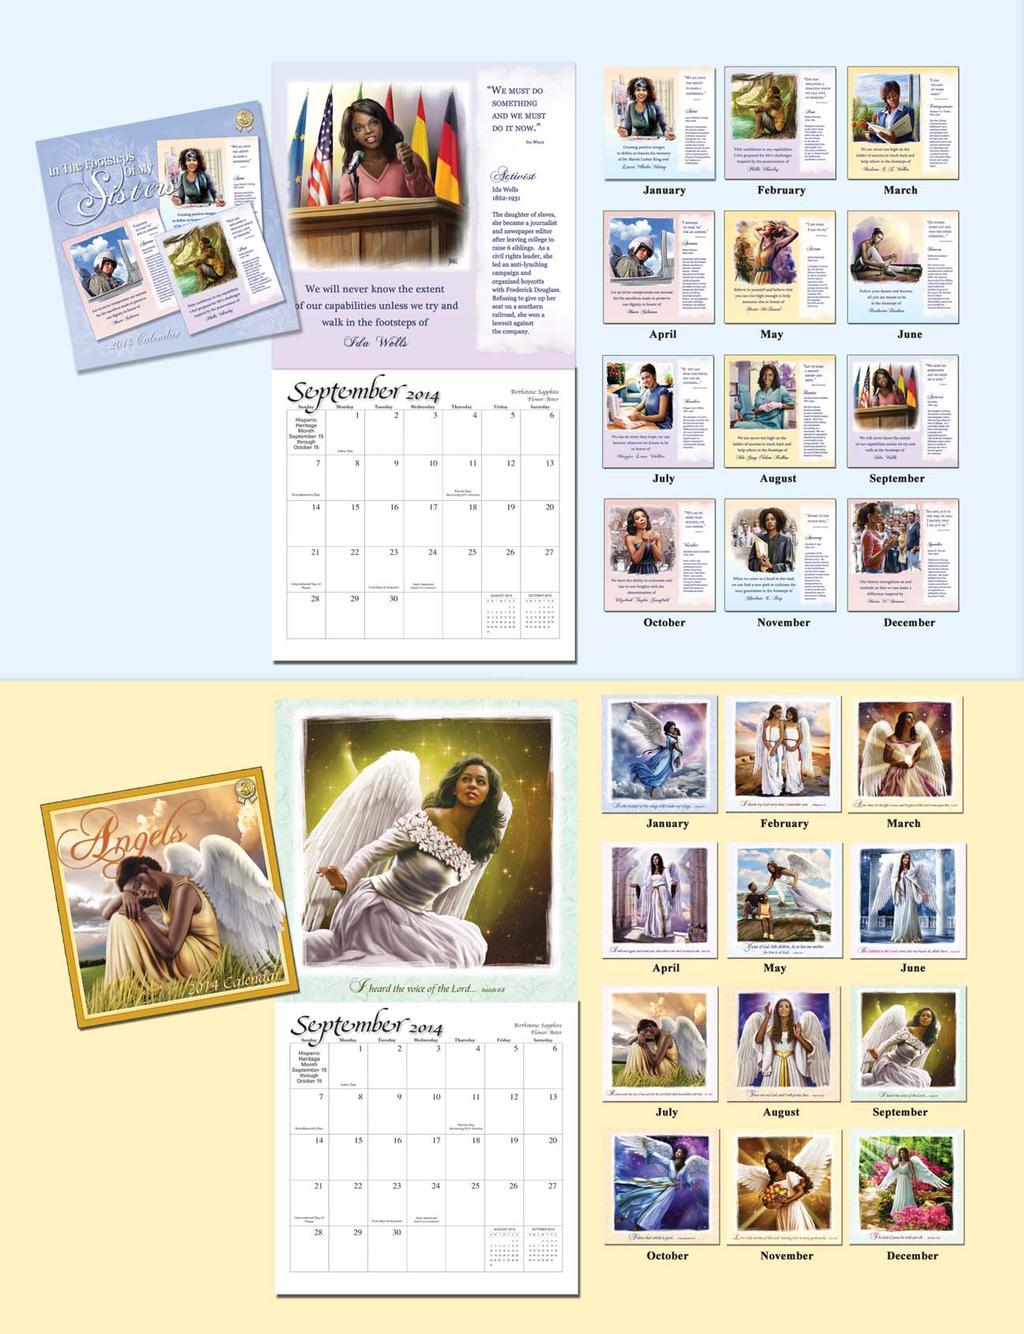 2014 Calendars 12 x 12 closed; 12 x 24 open Sisters 06 C101F $14.95 Beautiful! The 10th calendar in our sisters series is both a functional and lovely addition to the home or office.